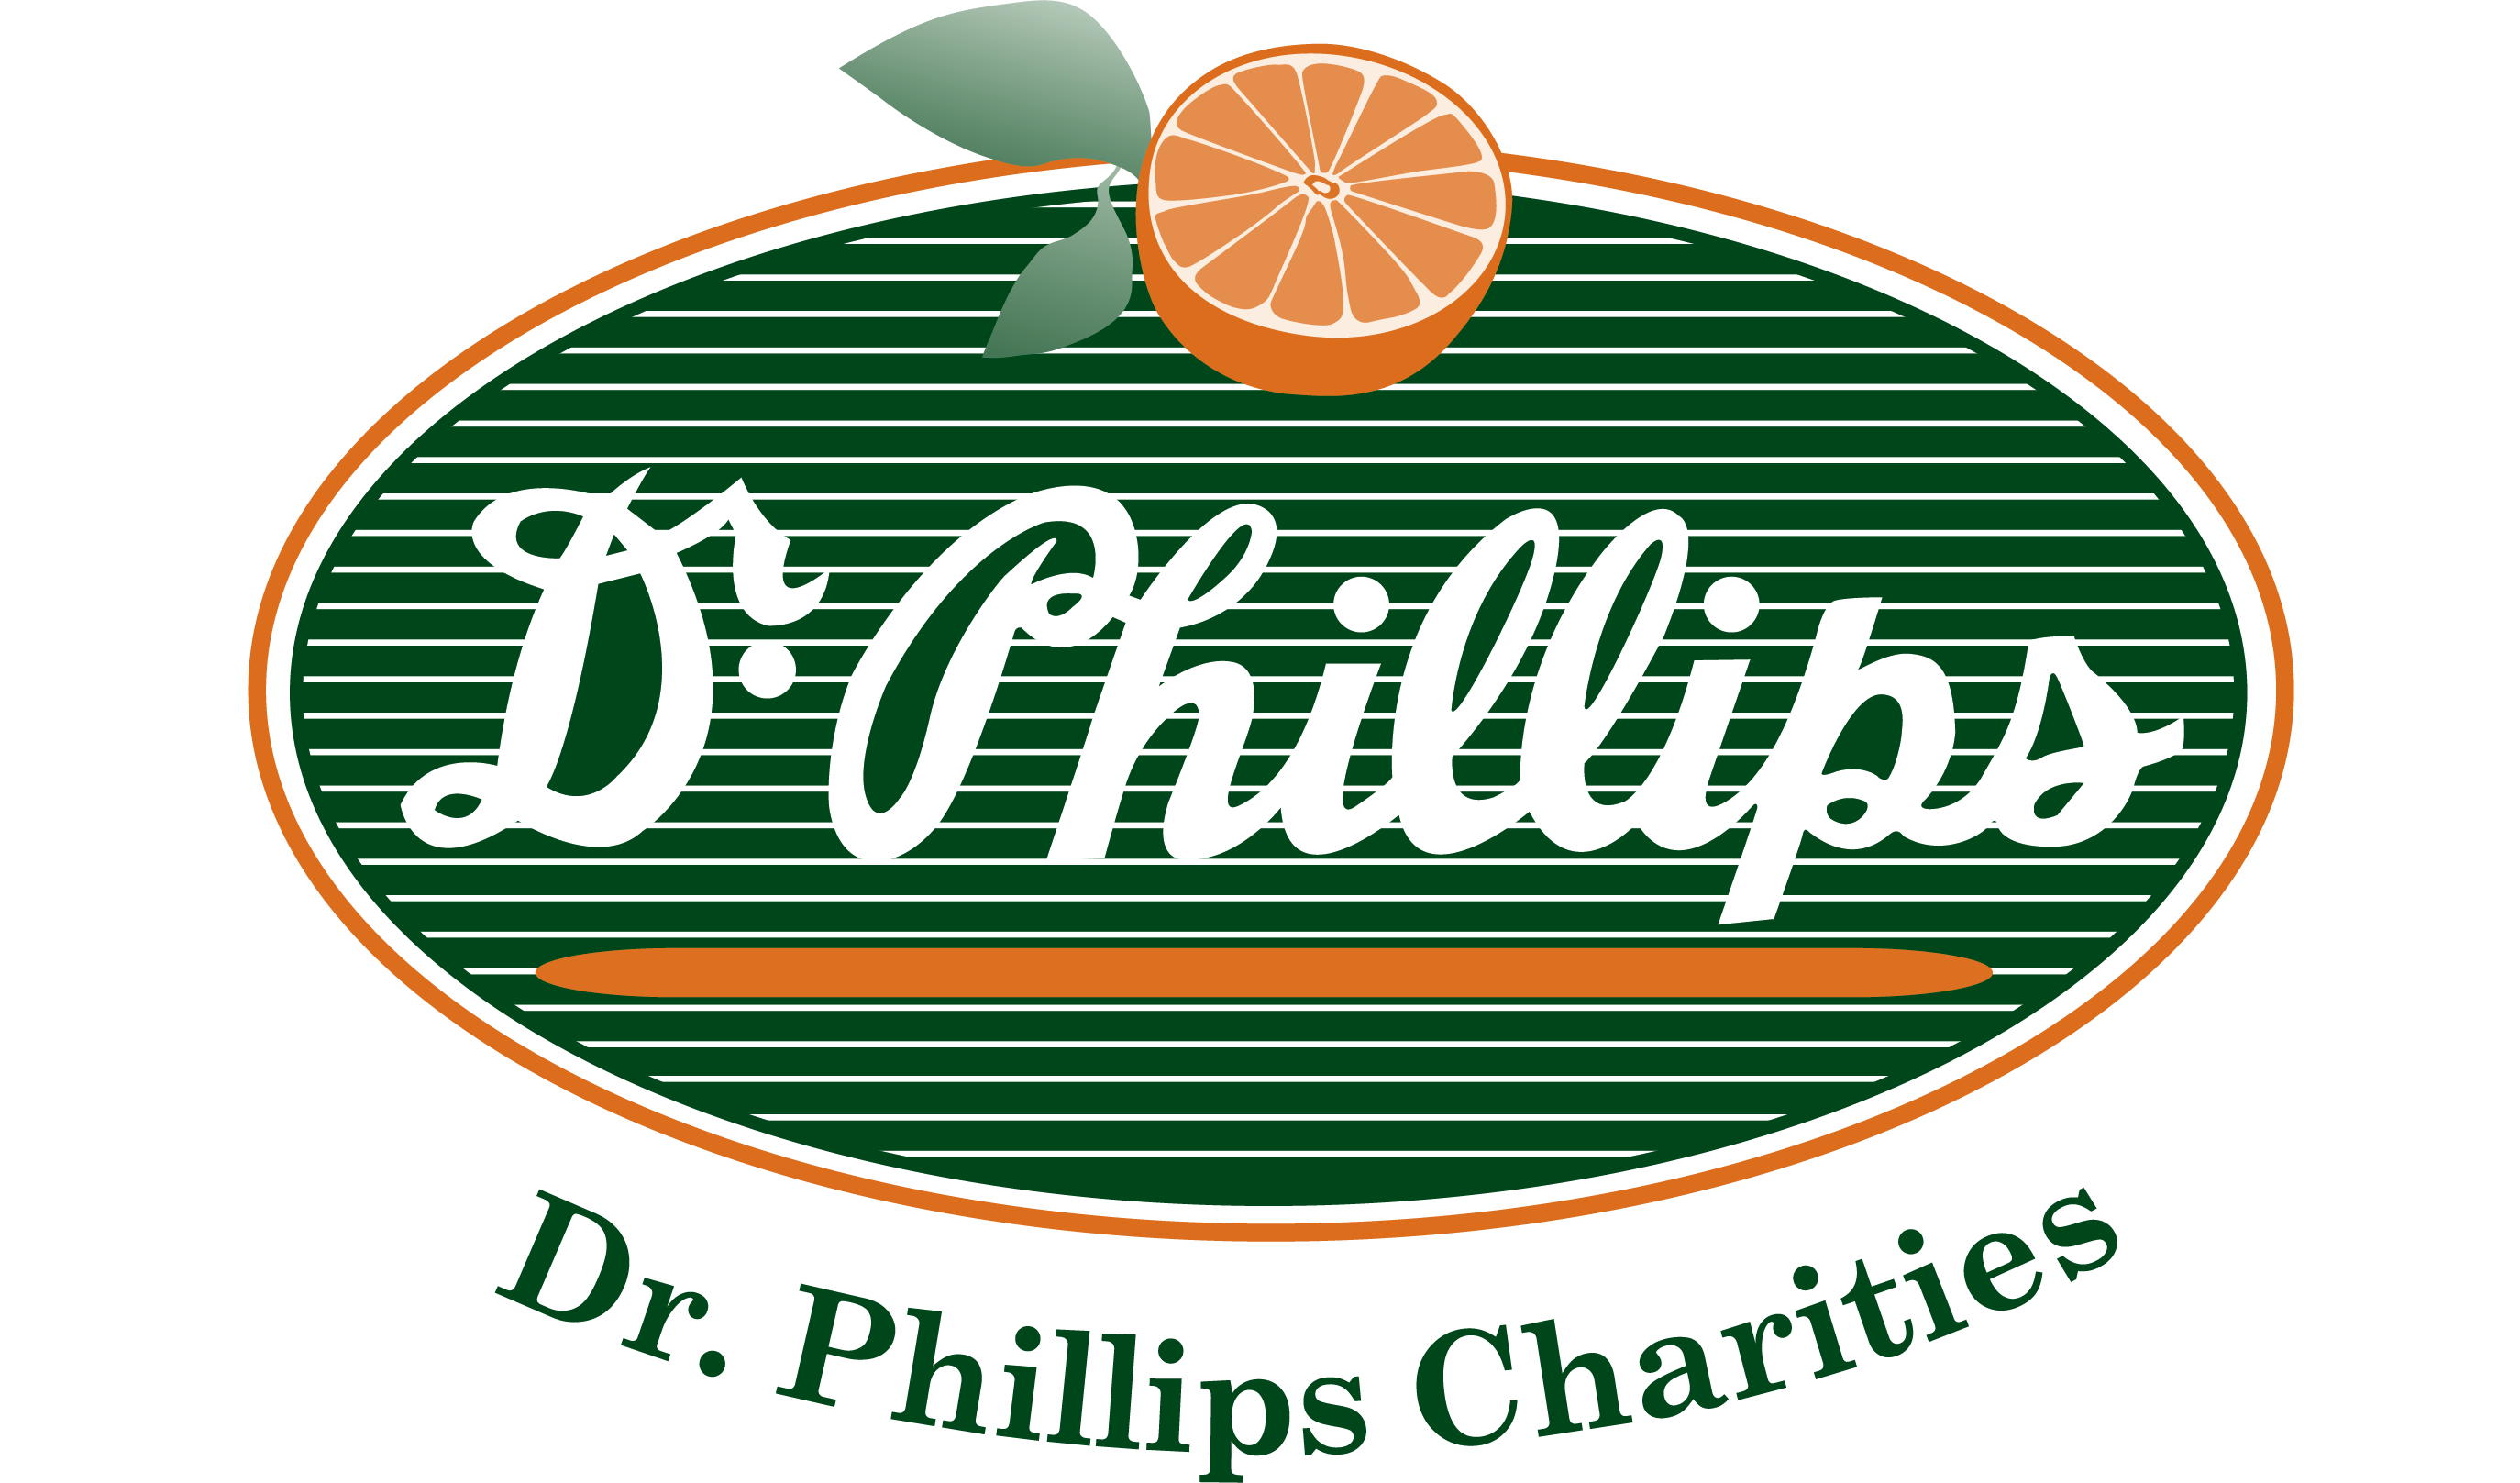 Celebrating the Impact of Dr. Phillips Charities in the Time of COVID-19